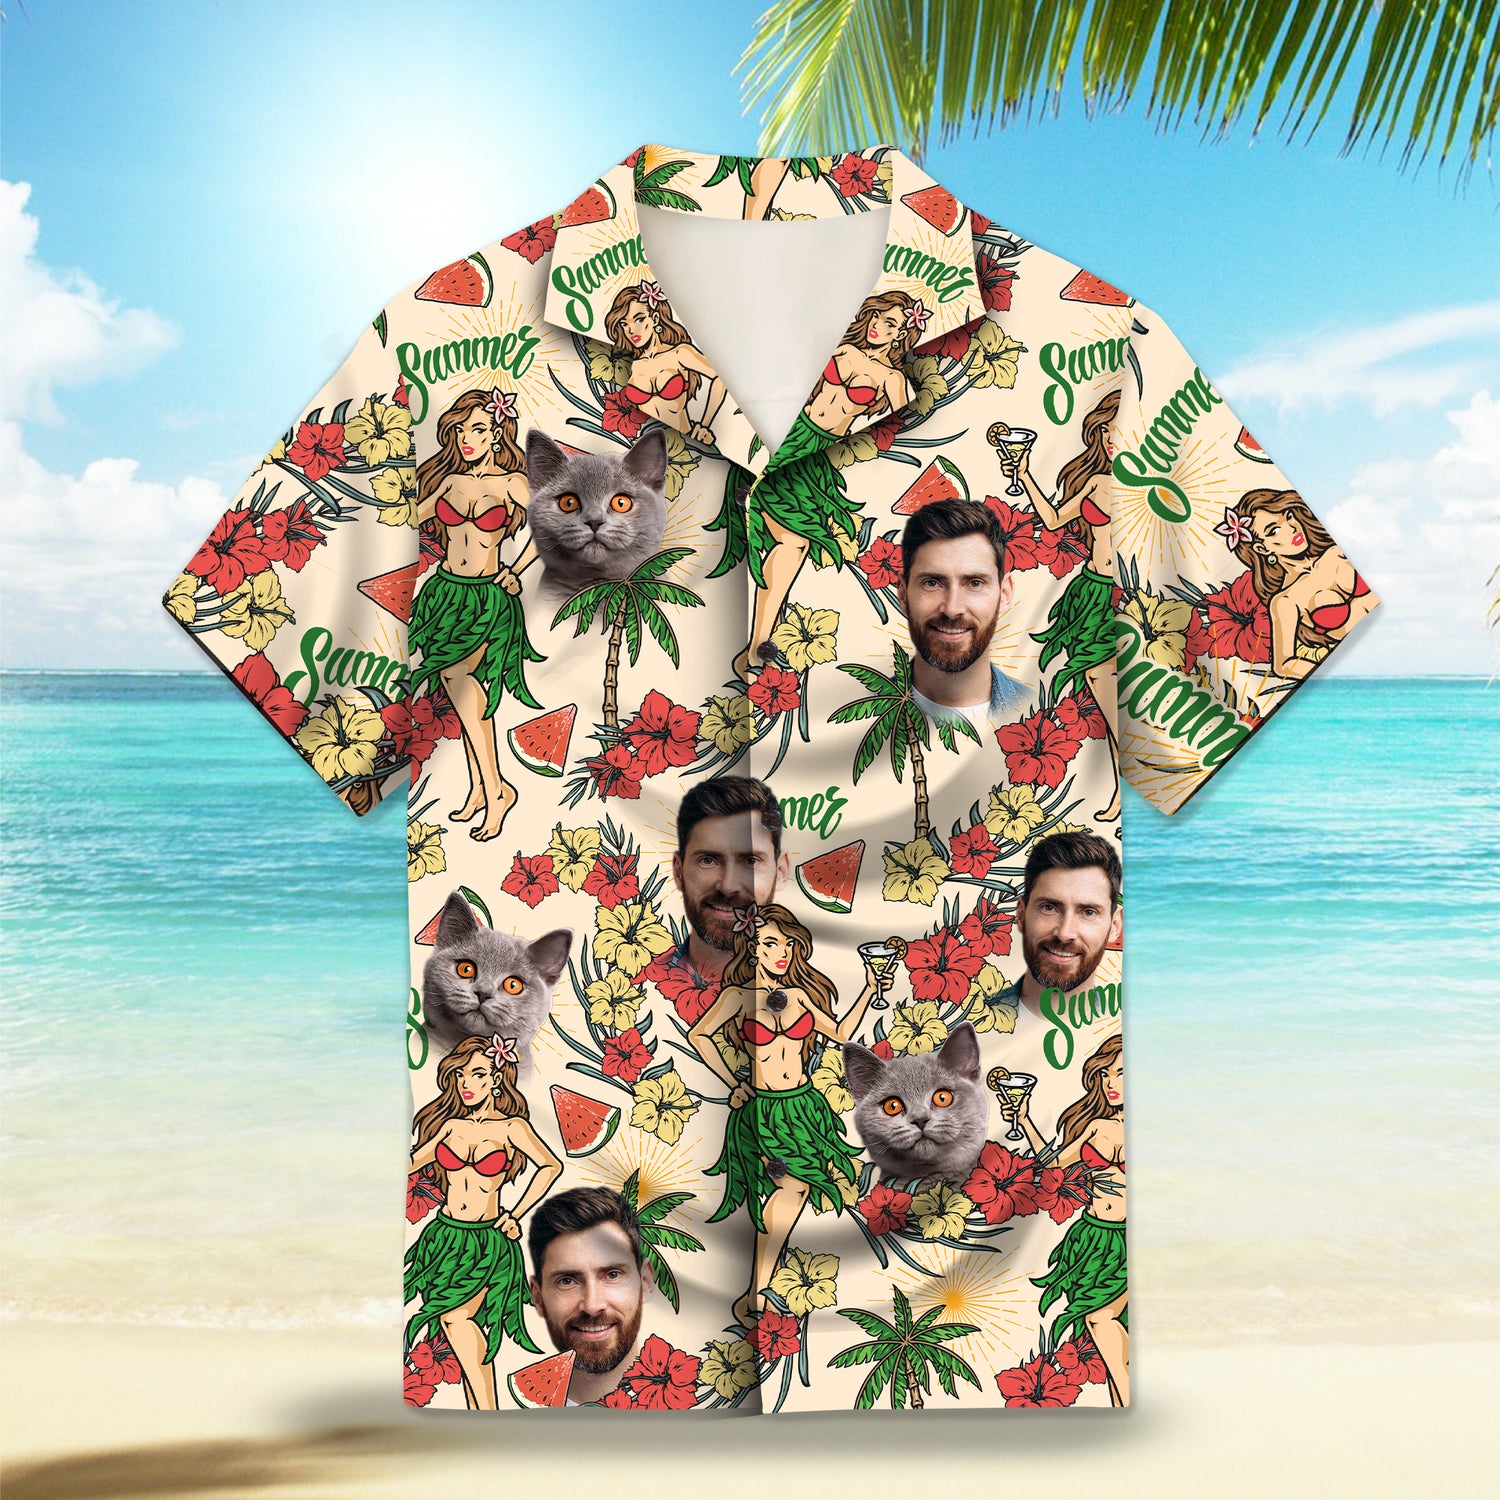 Image: Hawaiian Summer Party Custom Hawaiian Shirt. Featuring vibrant tropical designs perfect for summer parties, with hibiscus flowers, palm trees, Polynesian girls and beach elements. Alt text for accessibility.